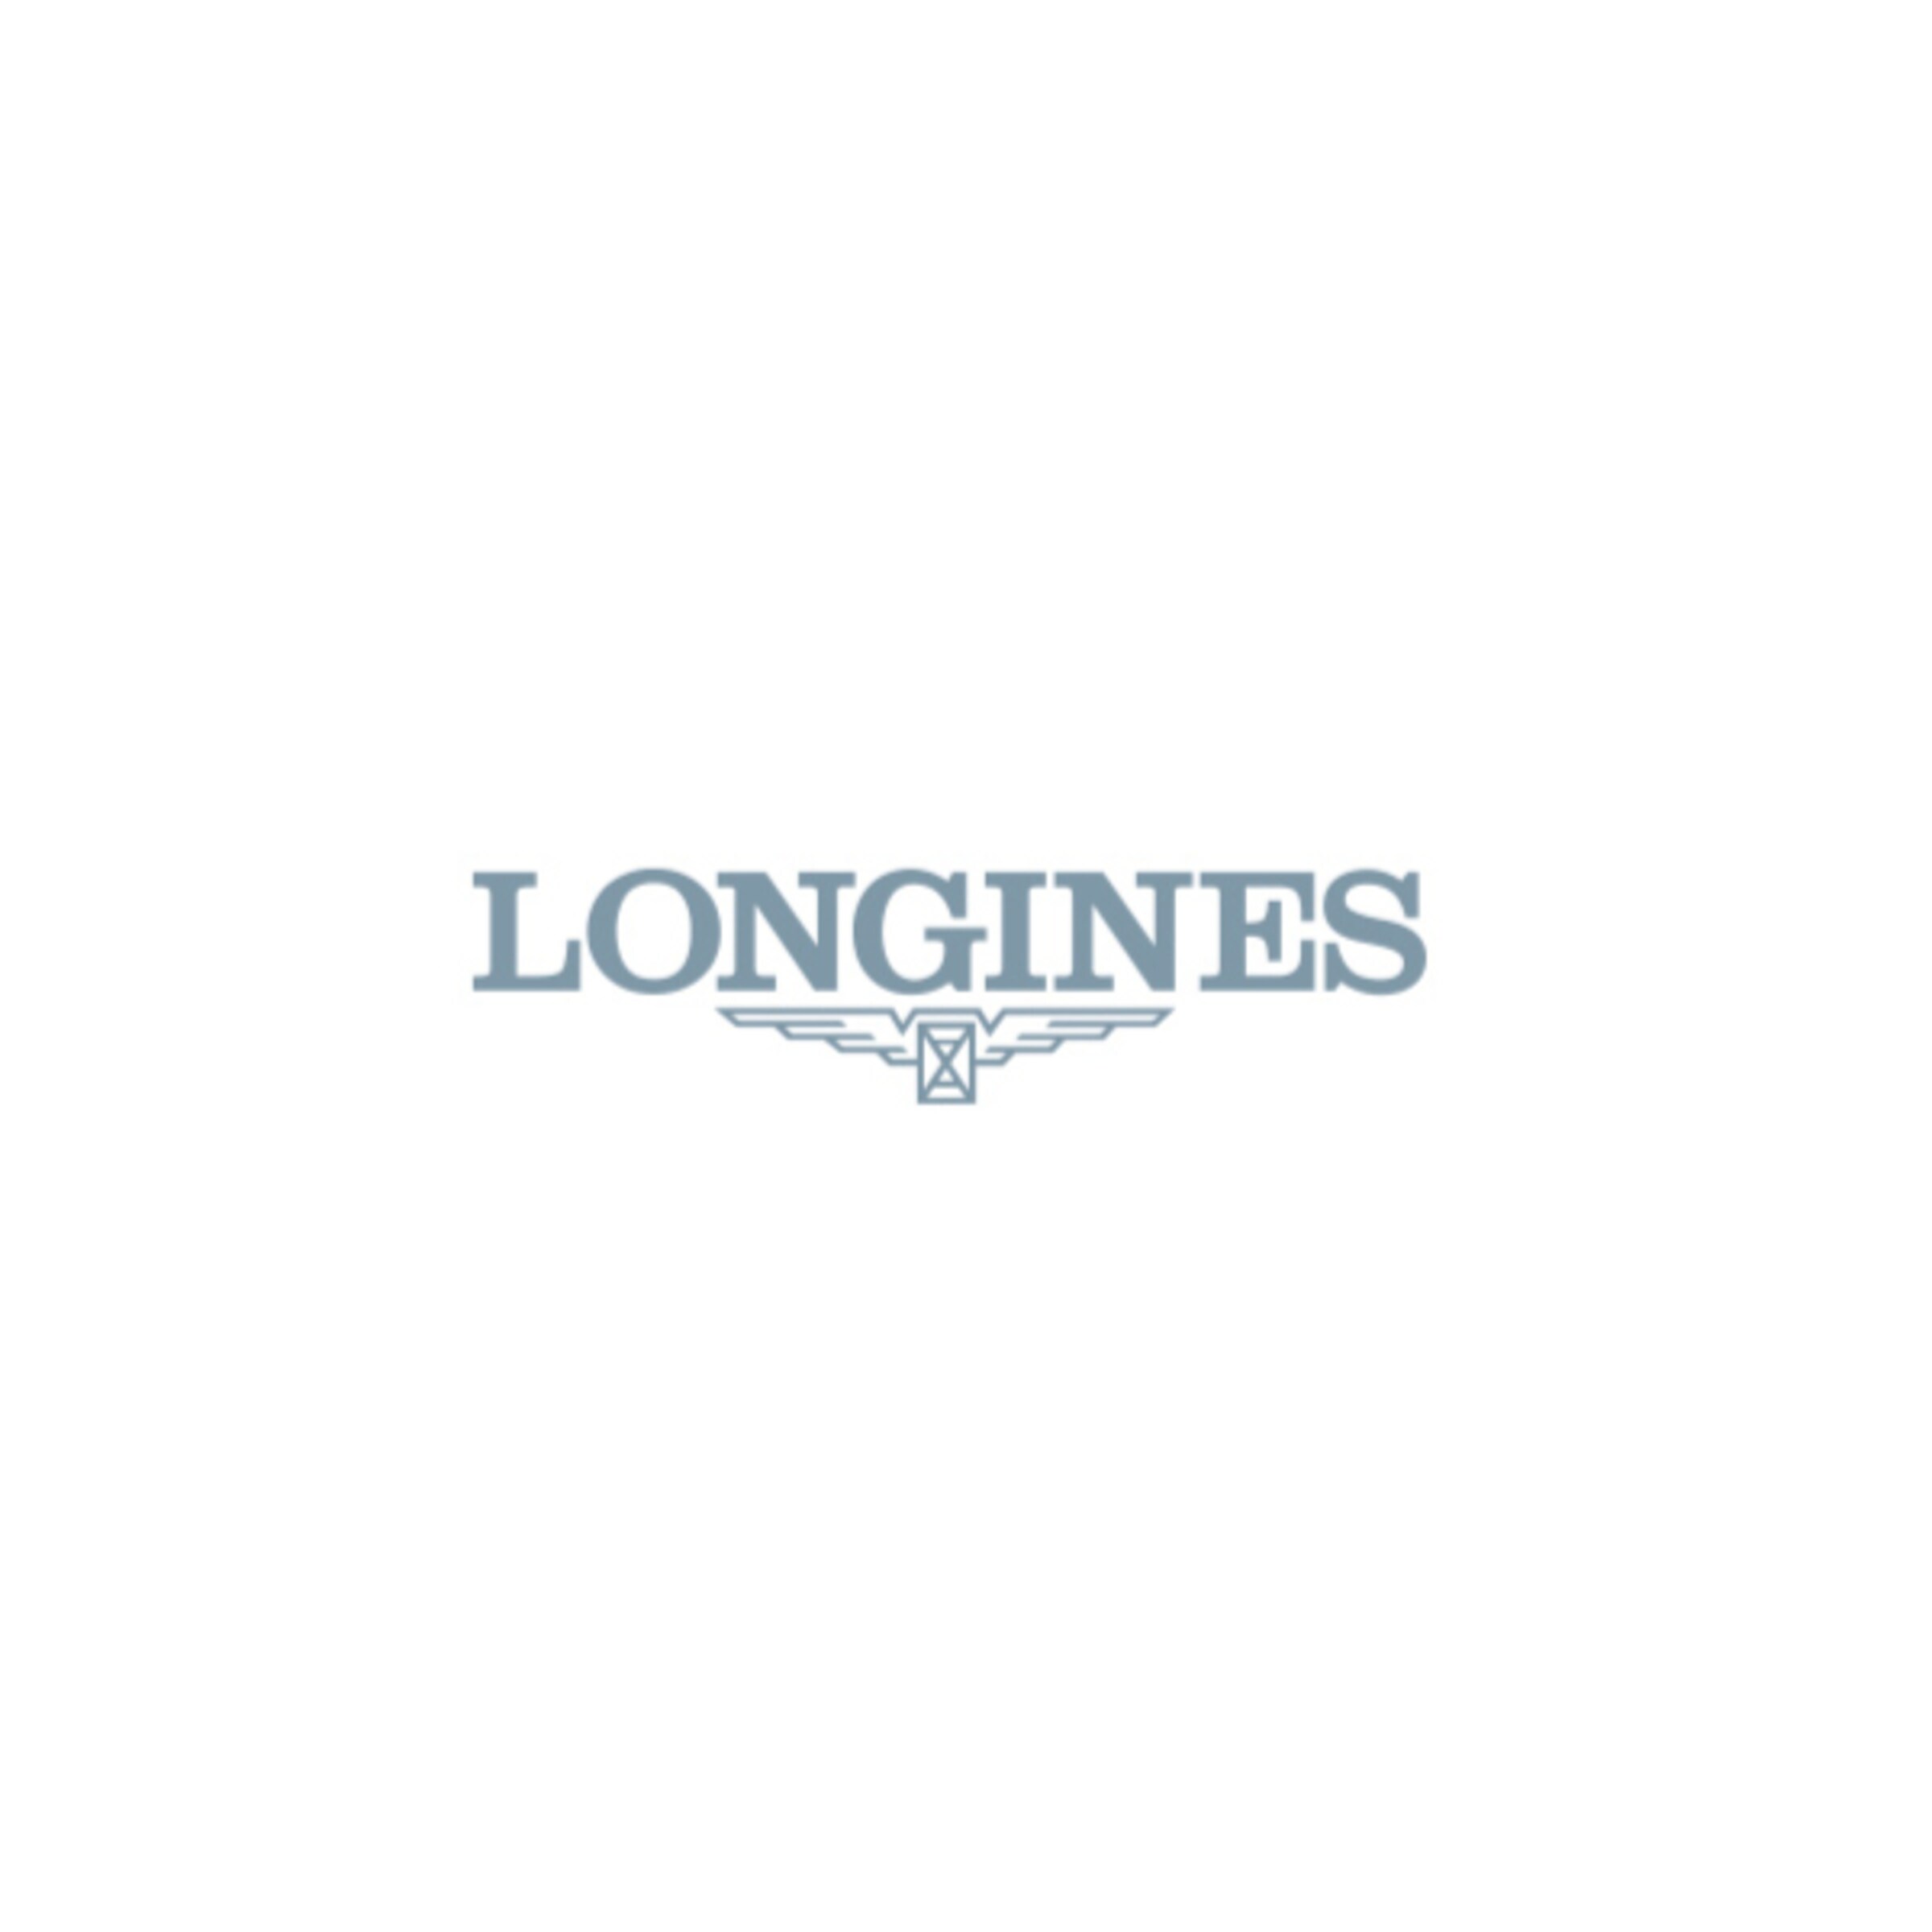 Longines THE LONGINES LEGEND DIVER WATCH Automatic Stainless steel Watch - L3.774.4.60.2